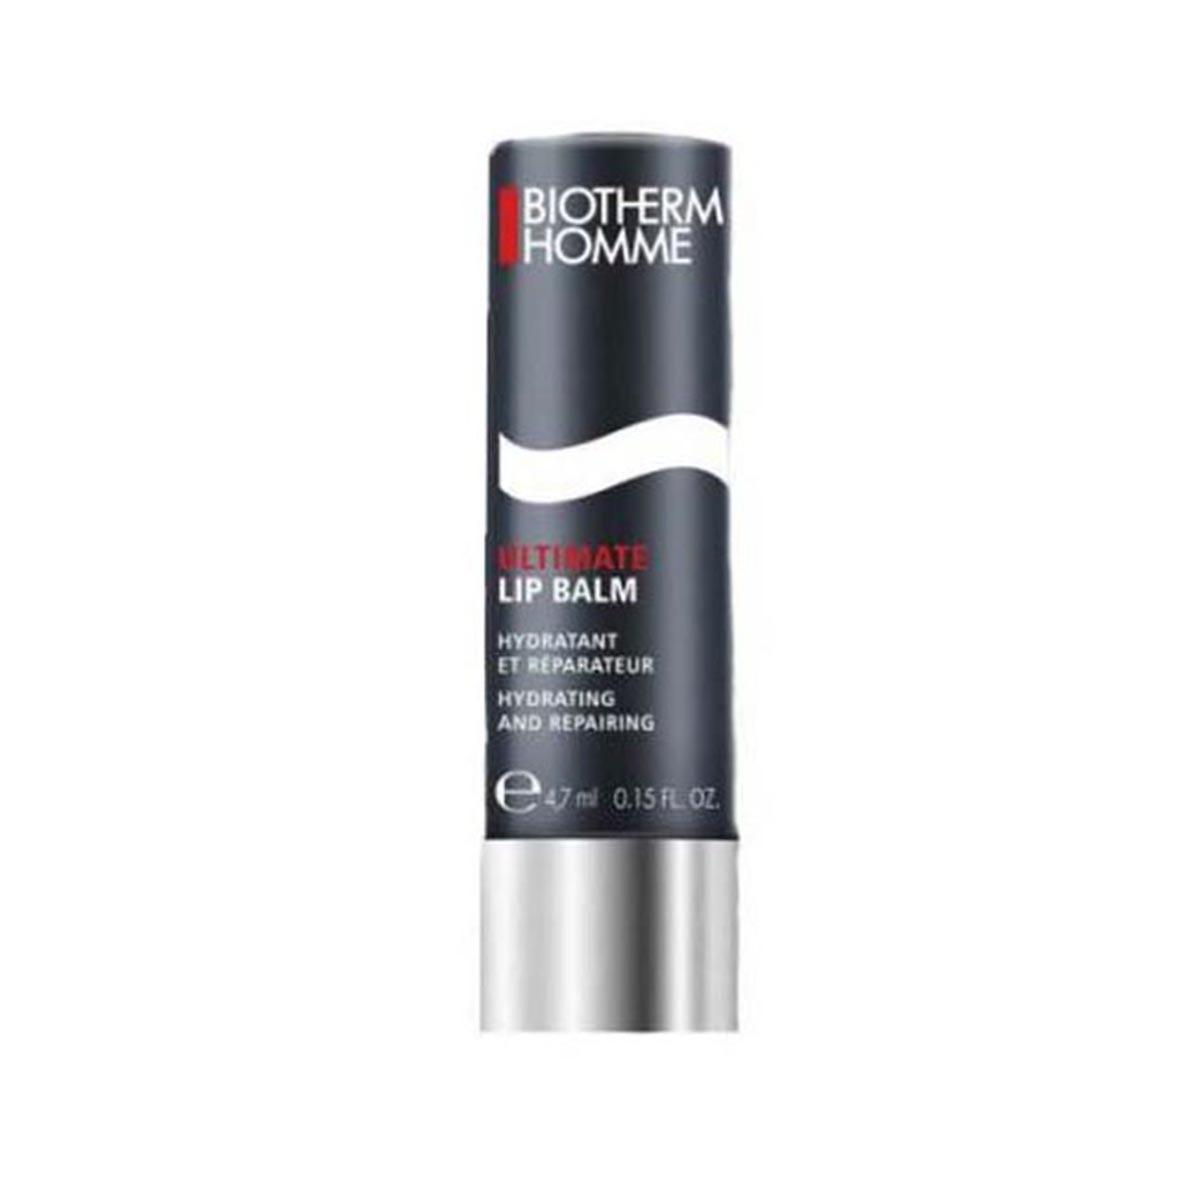 biotherm-homme-ultimate-lip-balm-4.7ml